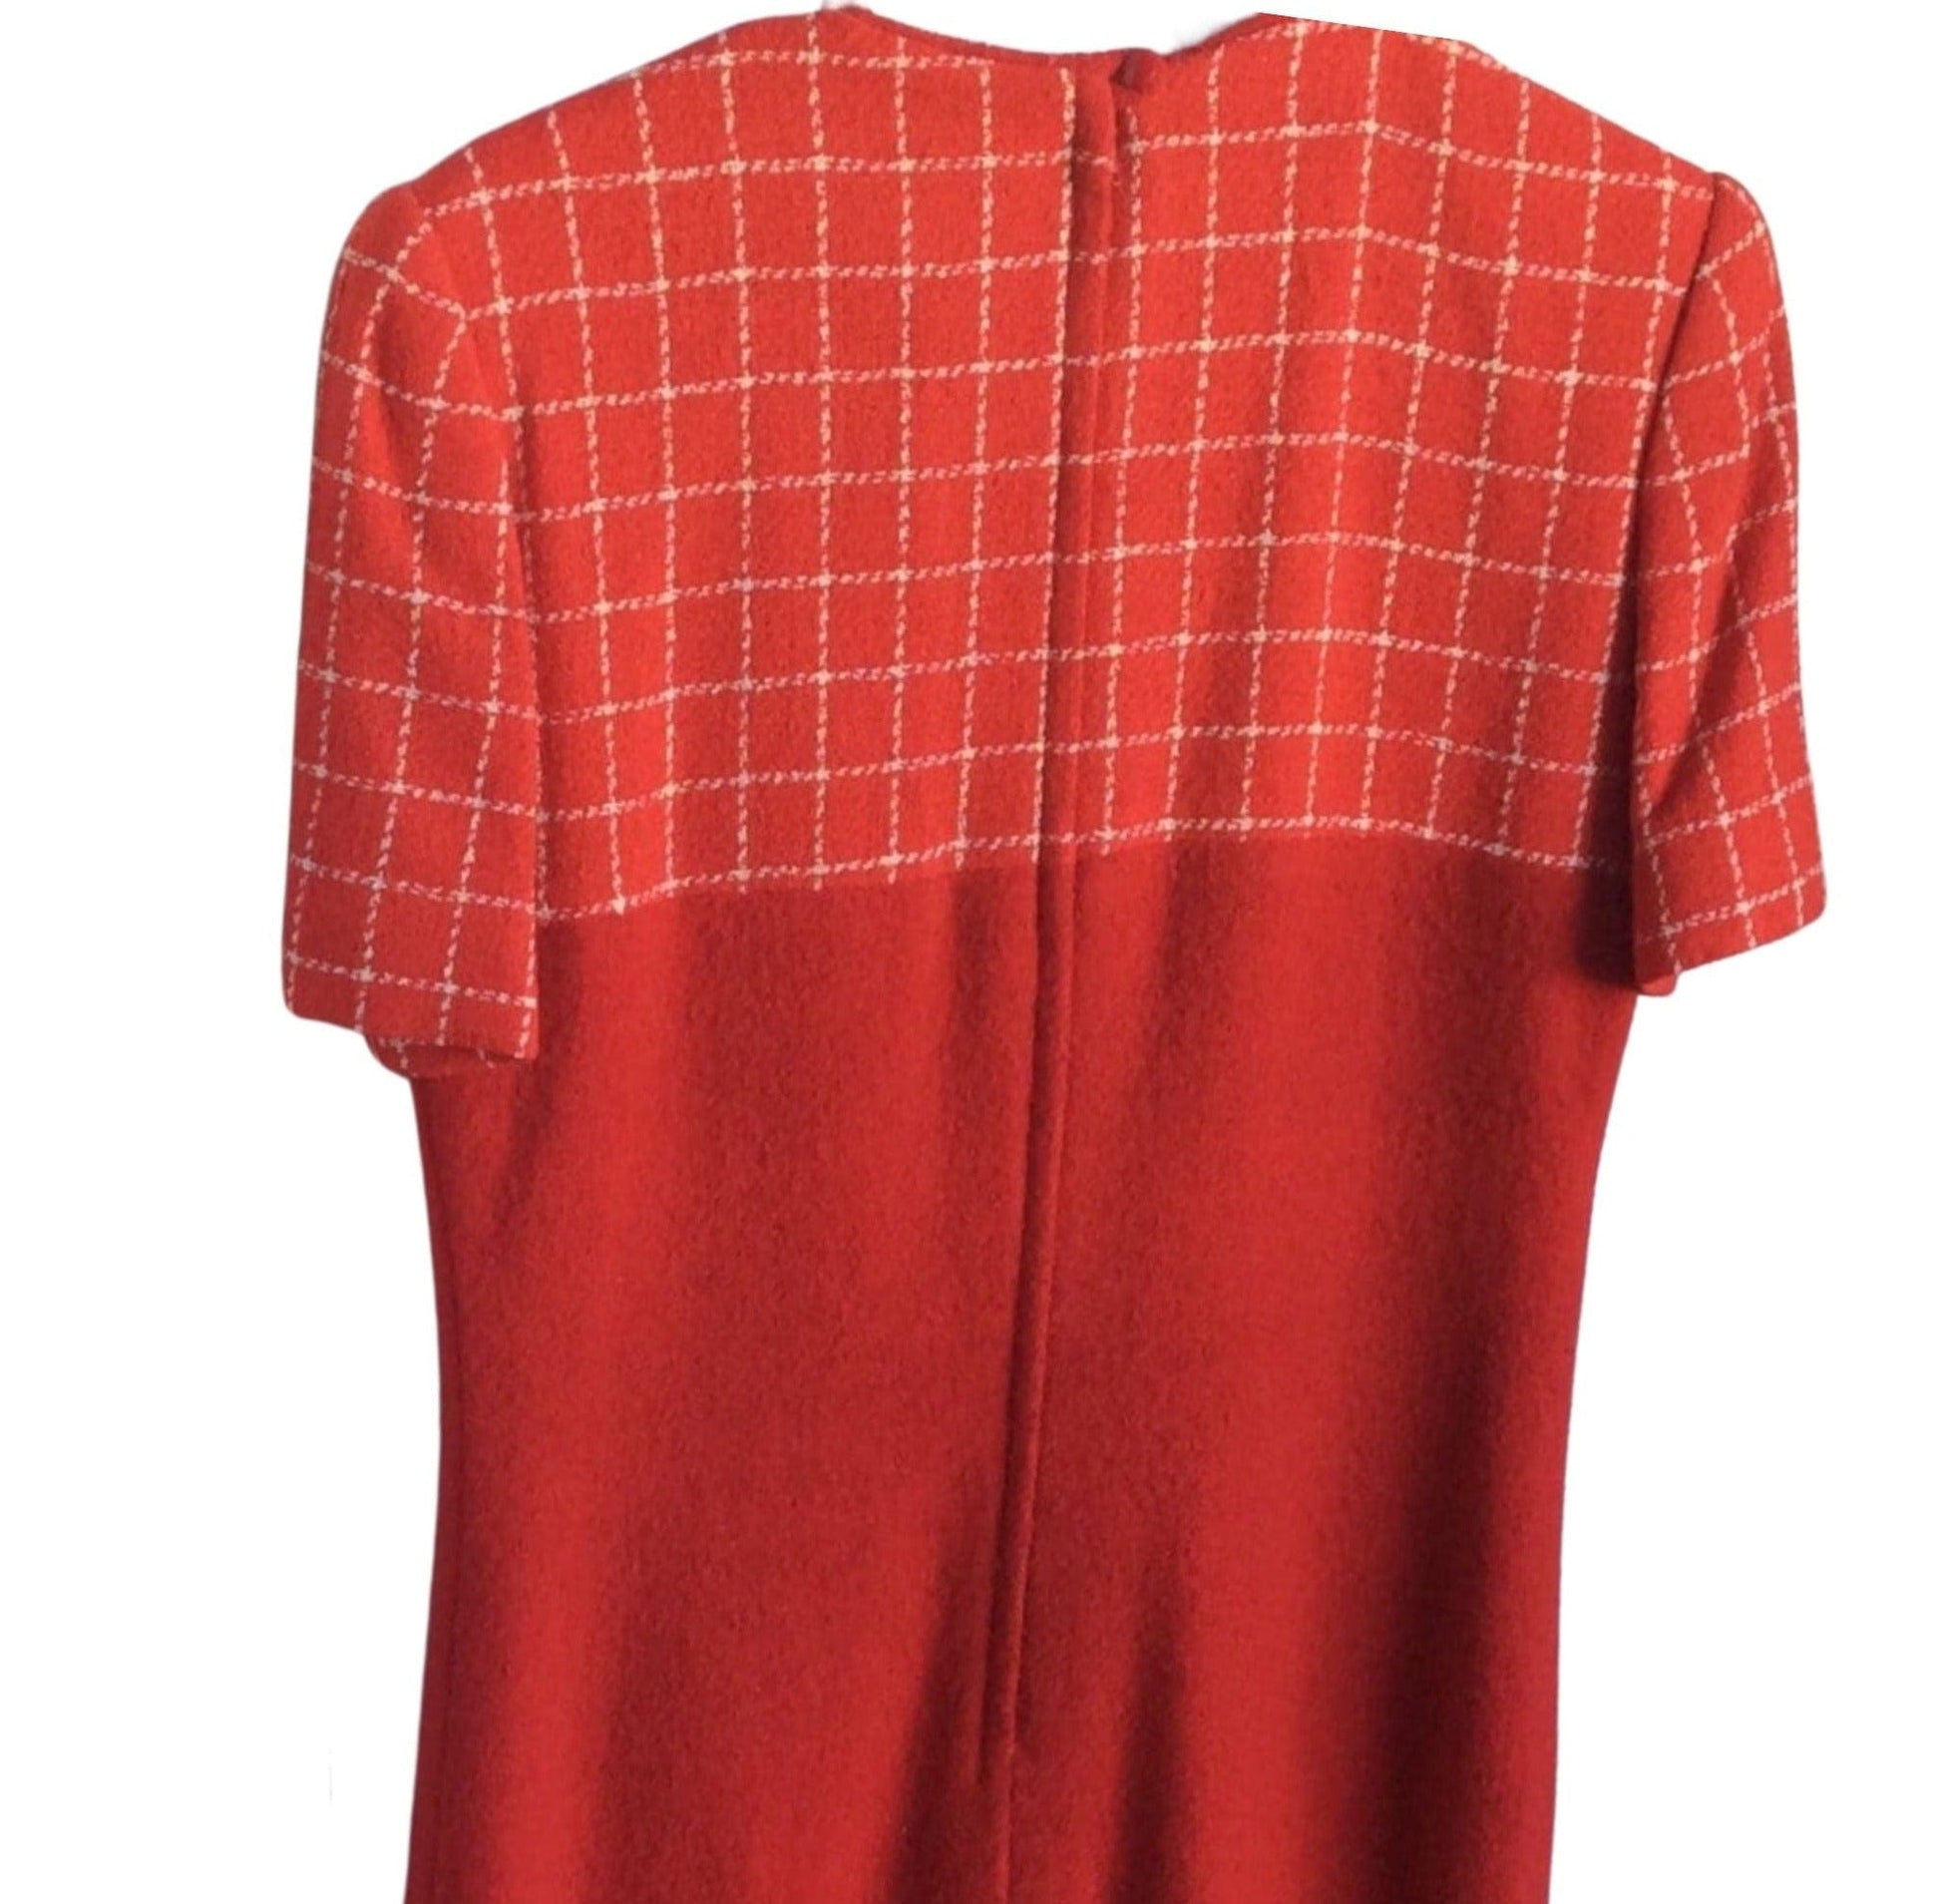 David Hayes Dress Outfit Medium / Red / Vintage 1980s